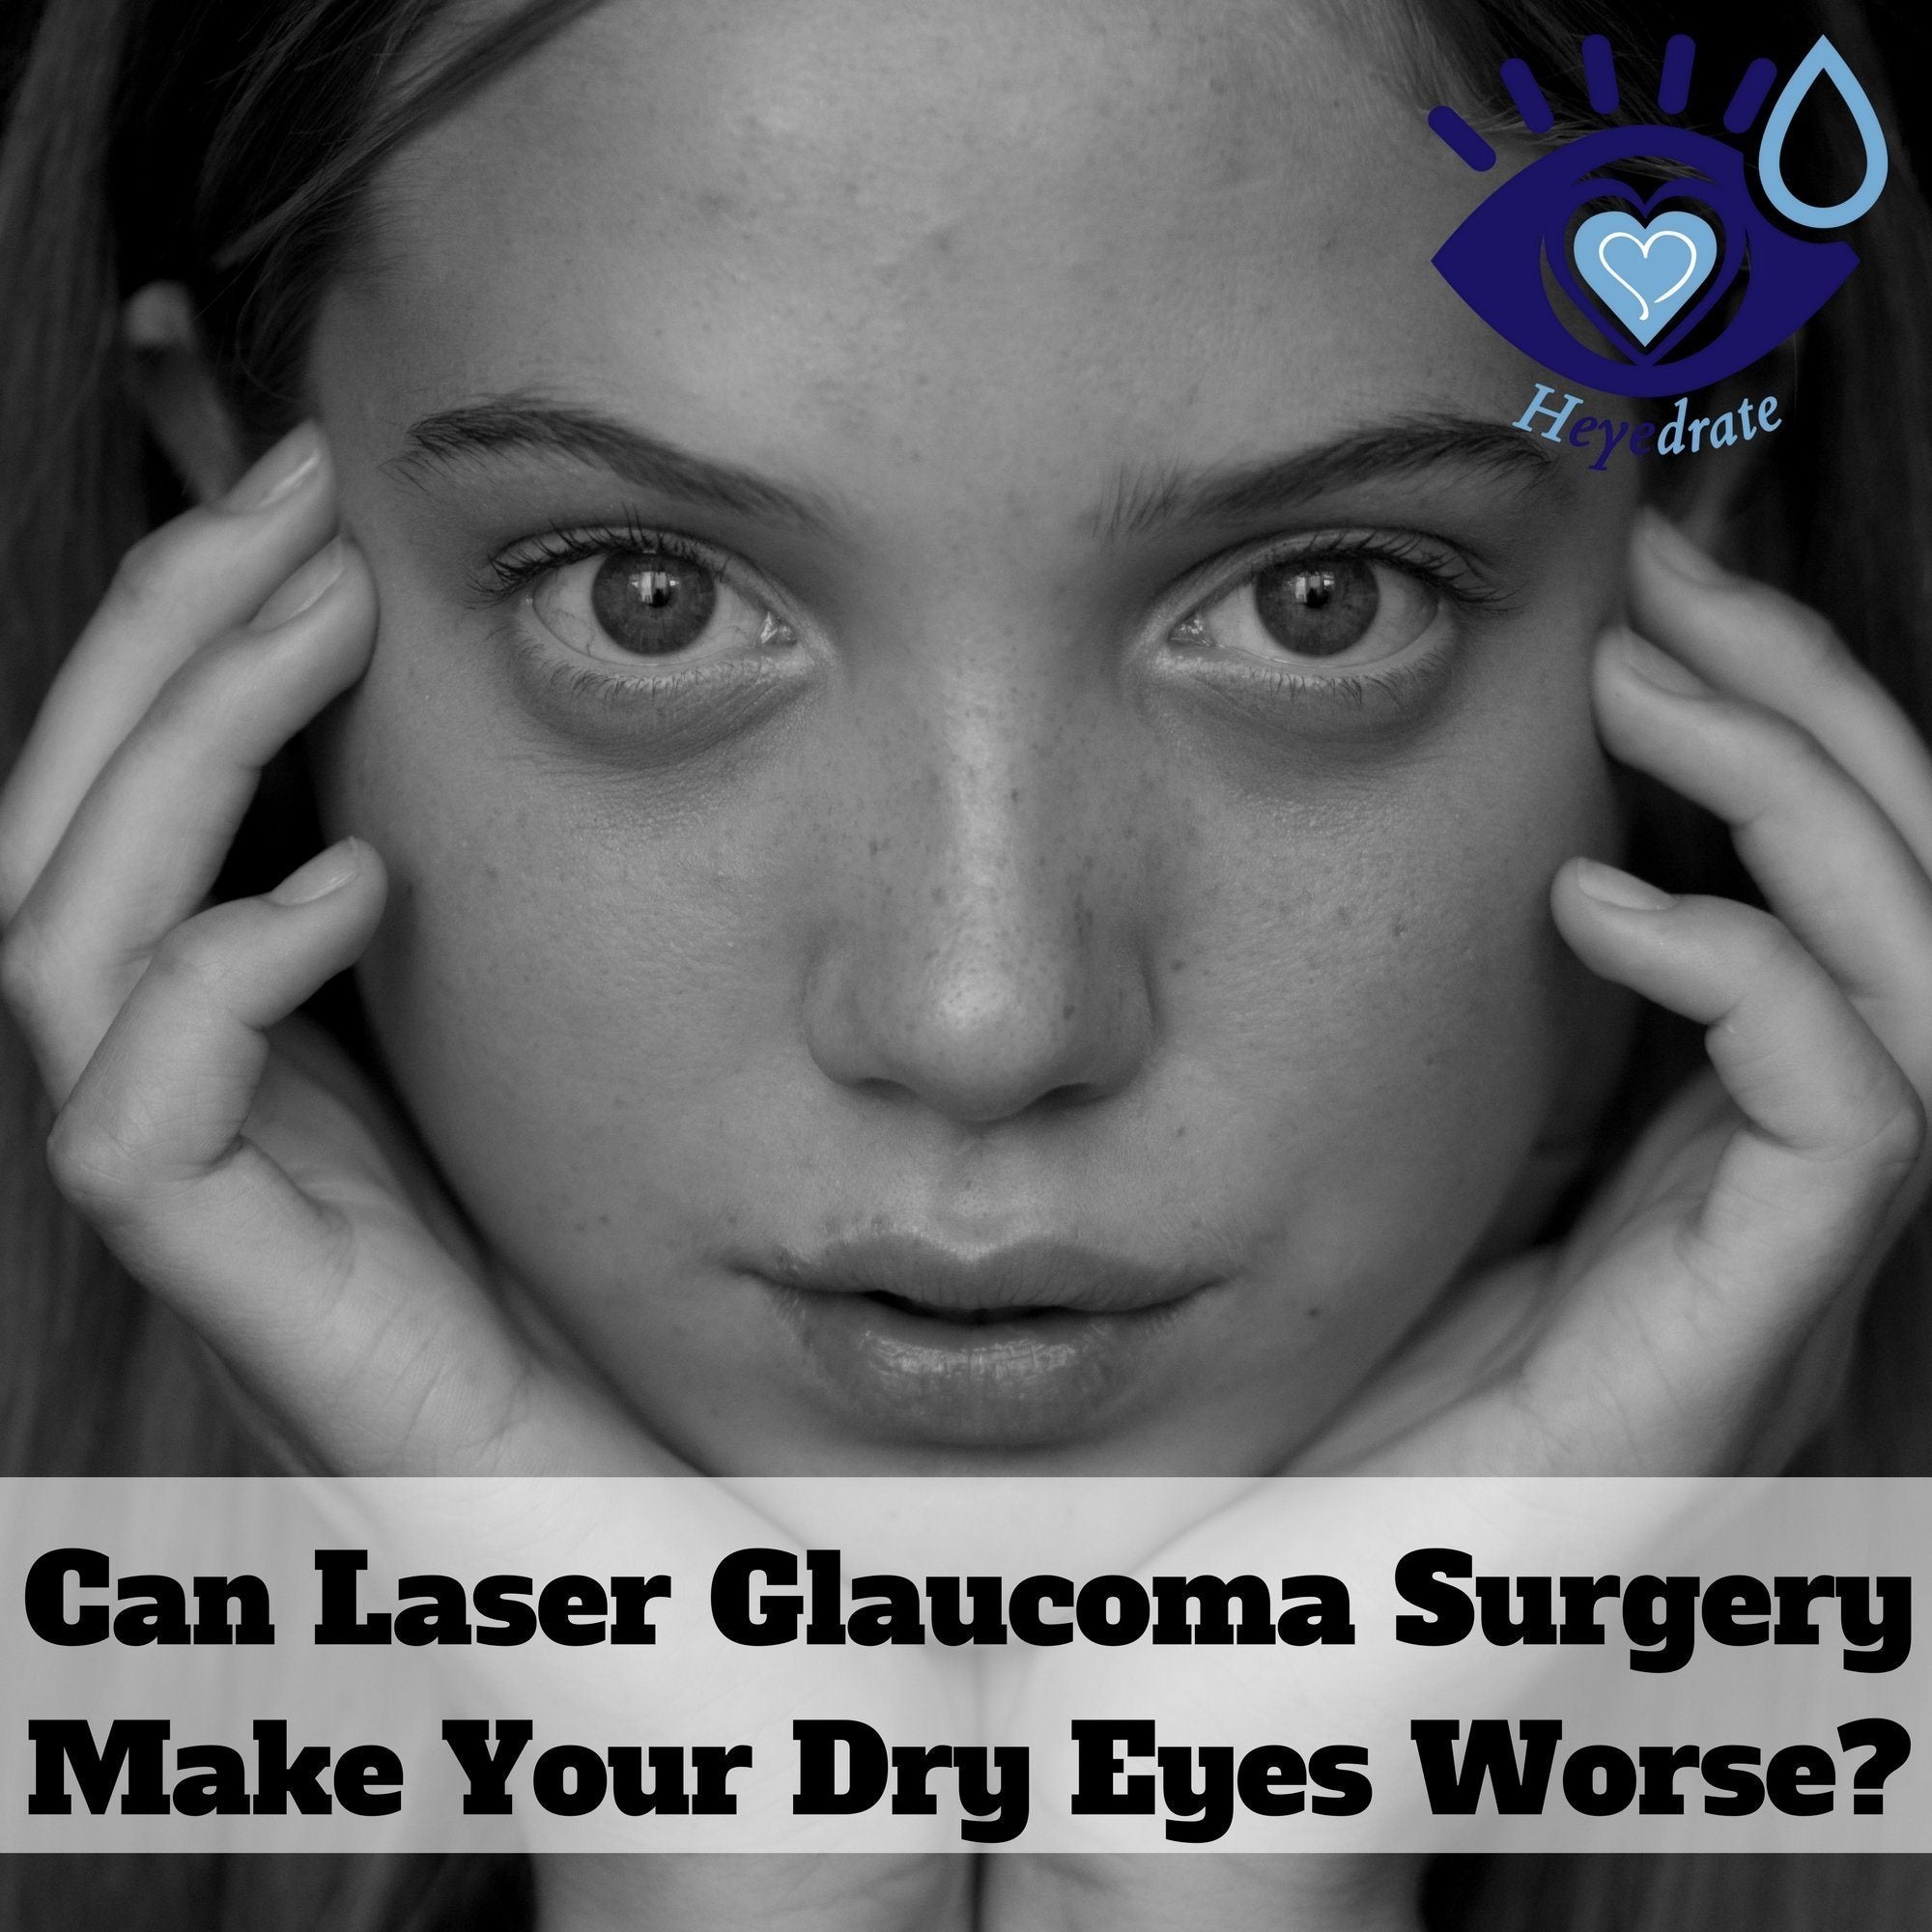 Can Laser Glaucoma Surgery Make Your Dry Eyes Worse?